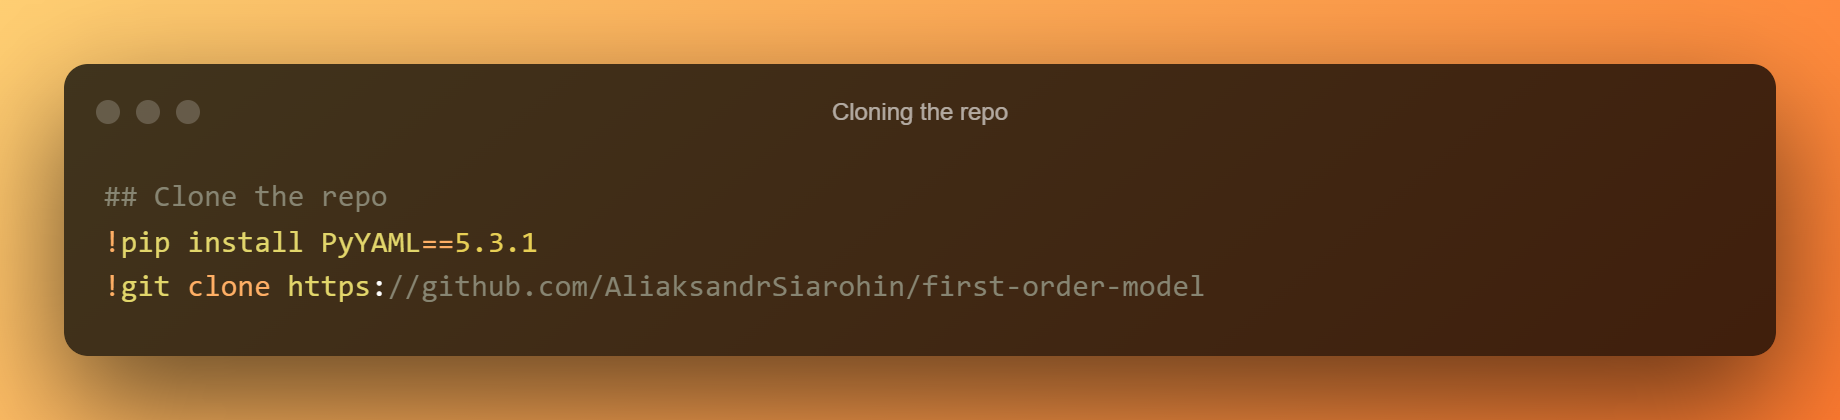 Cloning The Repo